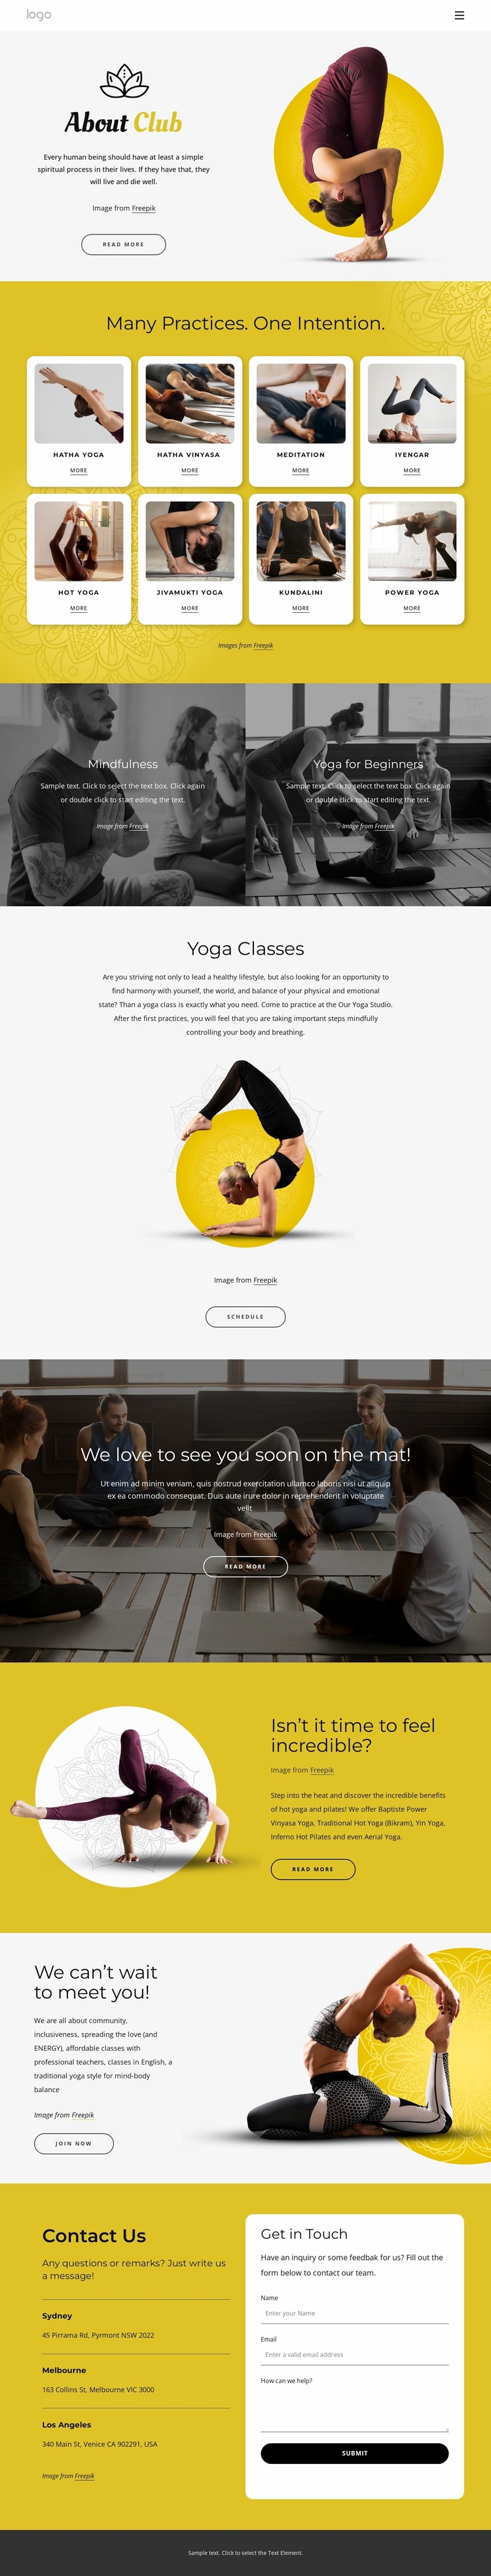 Physical, ethical and spiritual practice Website Design